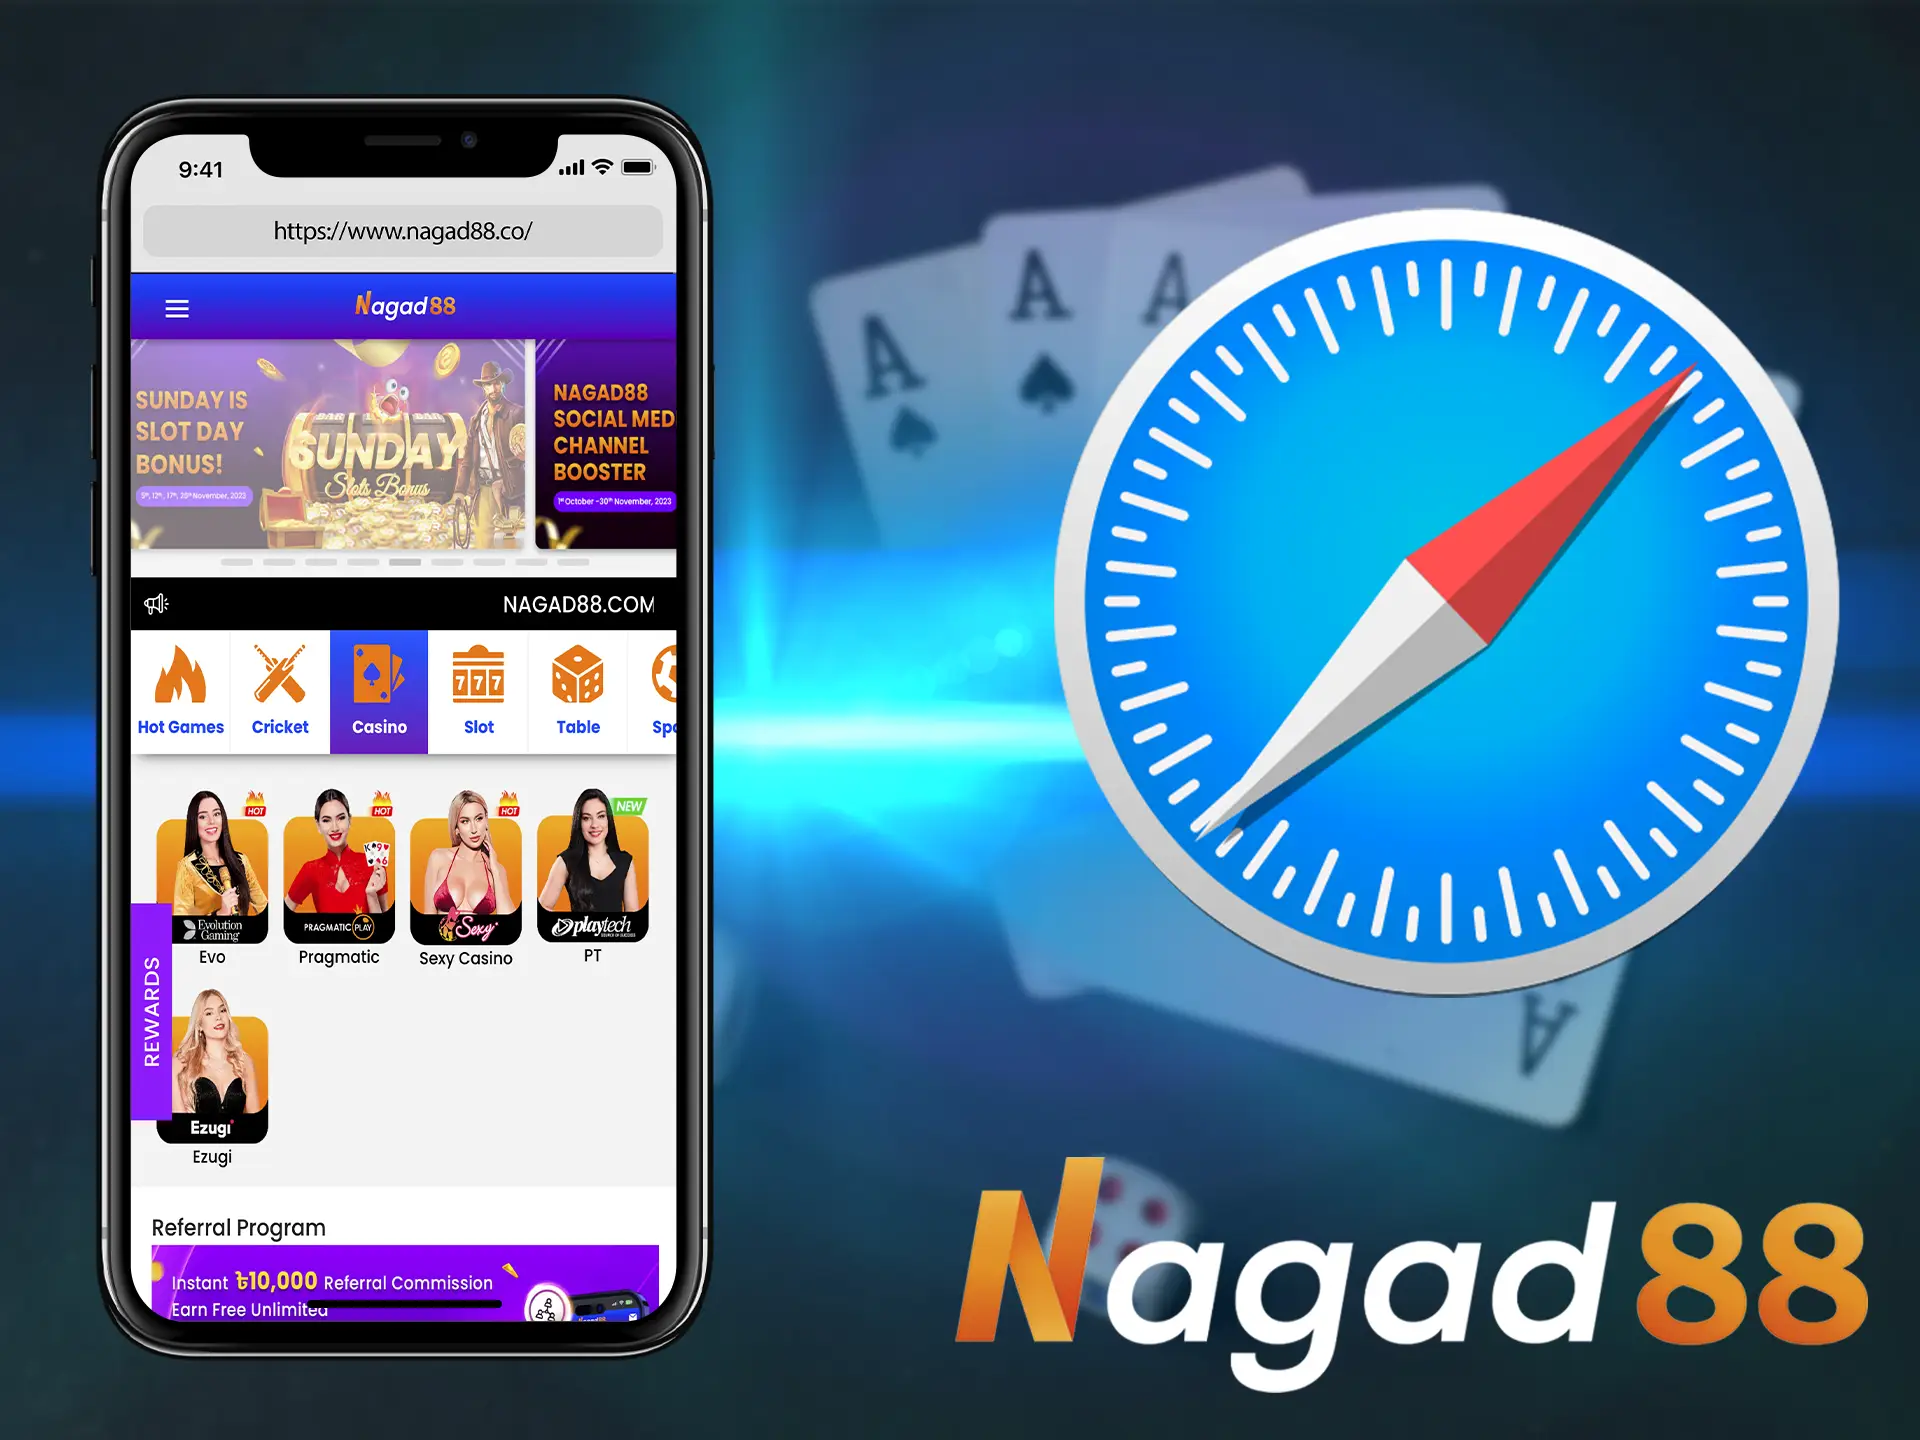 If your smartphone is not compatible with the application - this option from Nagad88 will help you enjoy the game.